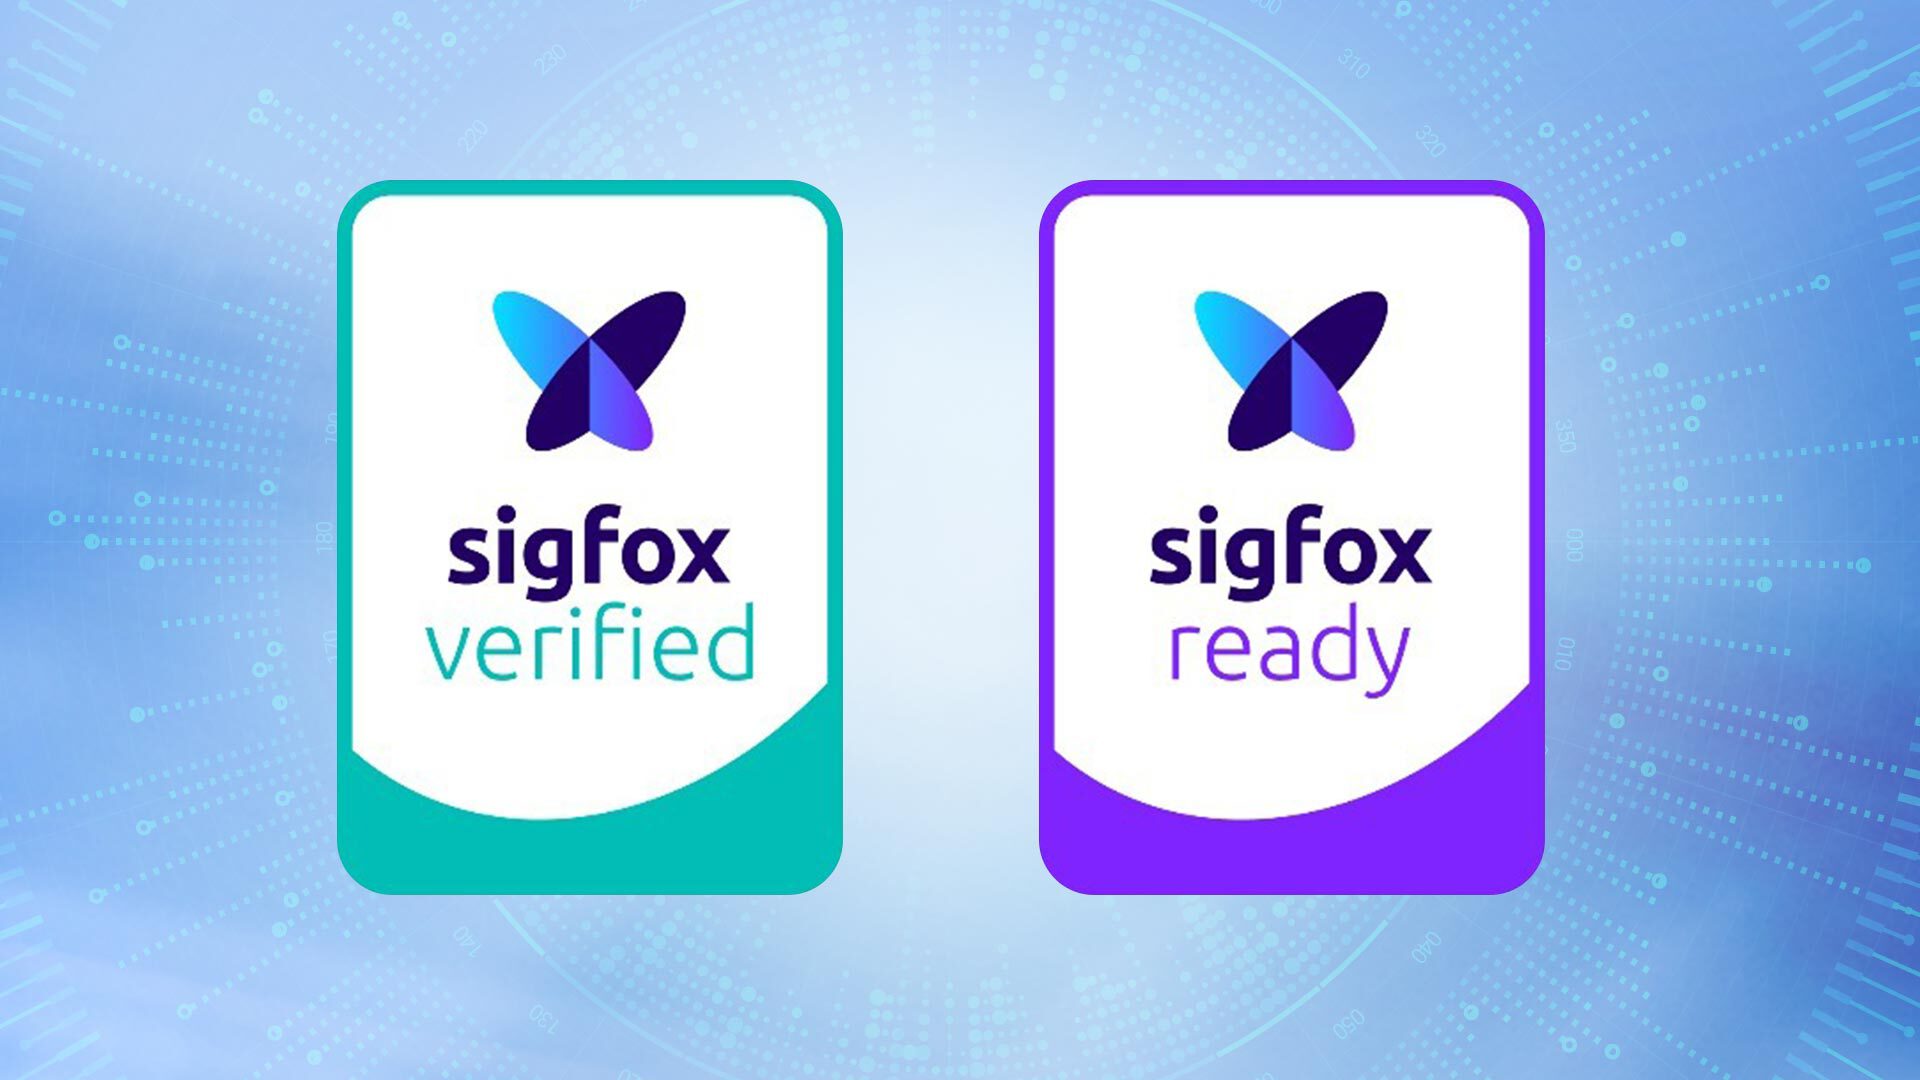 Labels of Sigfox ready and Sigfox verified